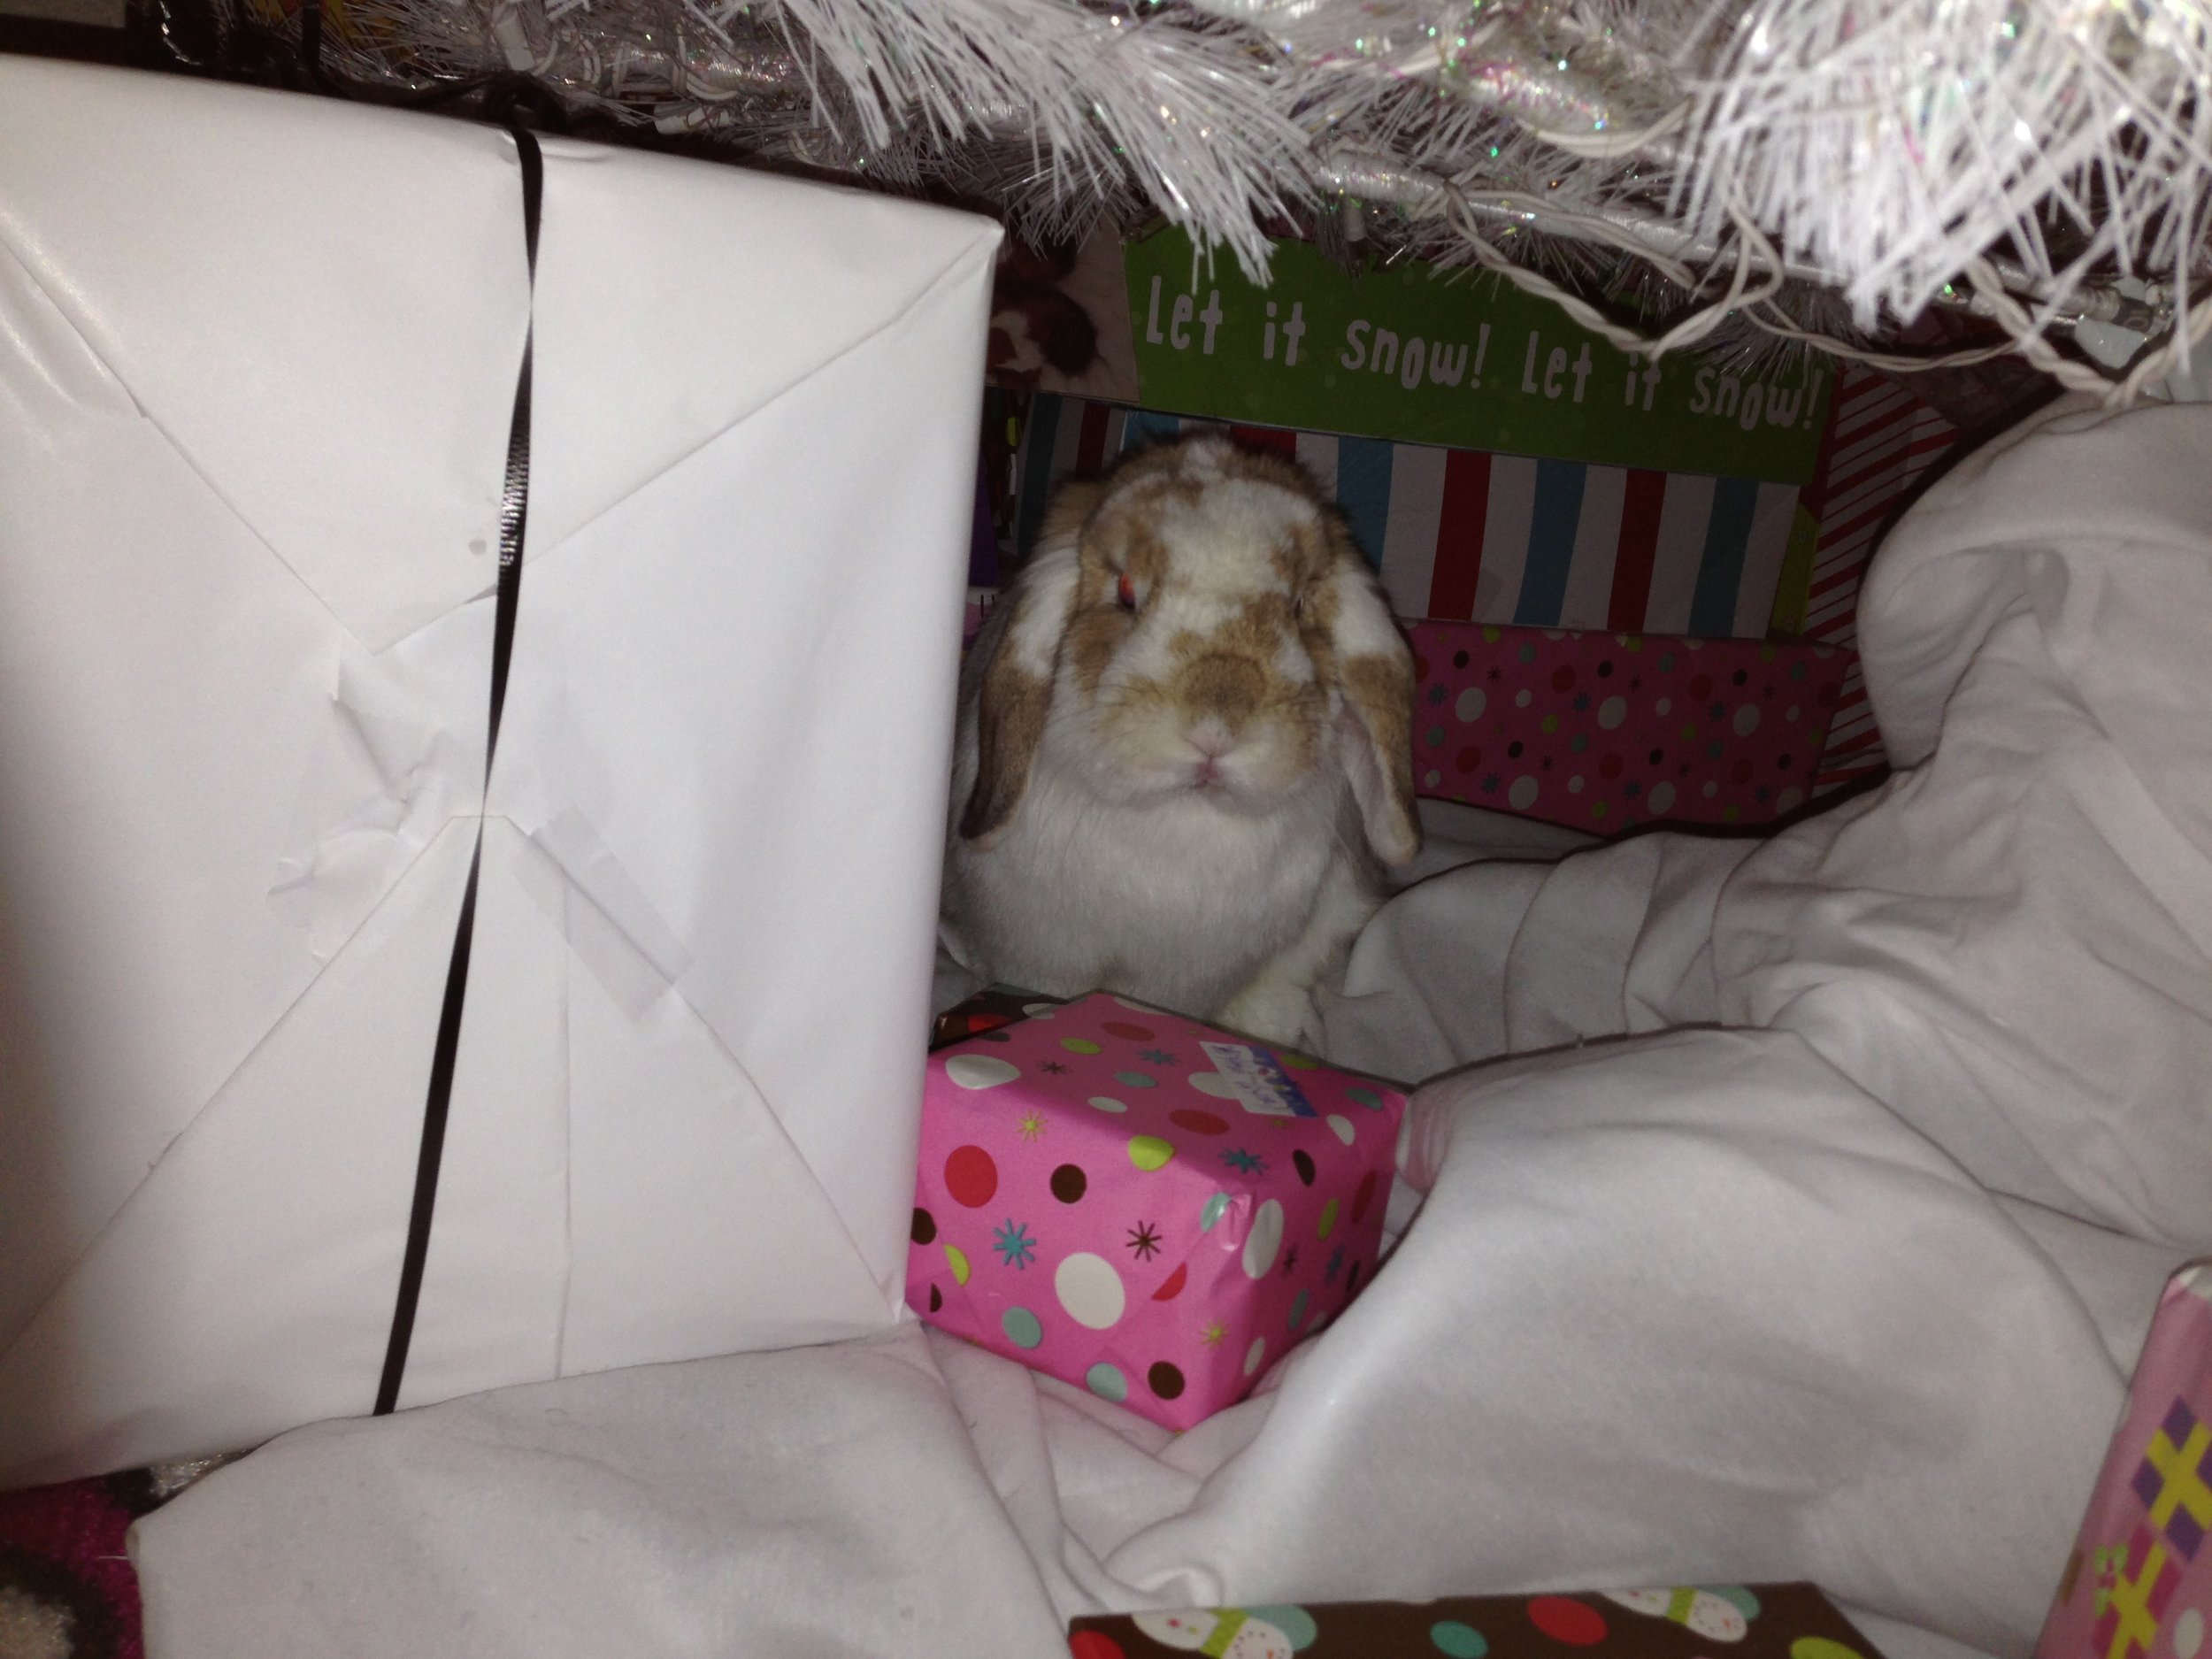 Enough Pictures, Human. Let's Open These Presents!